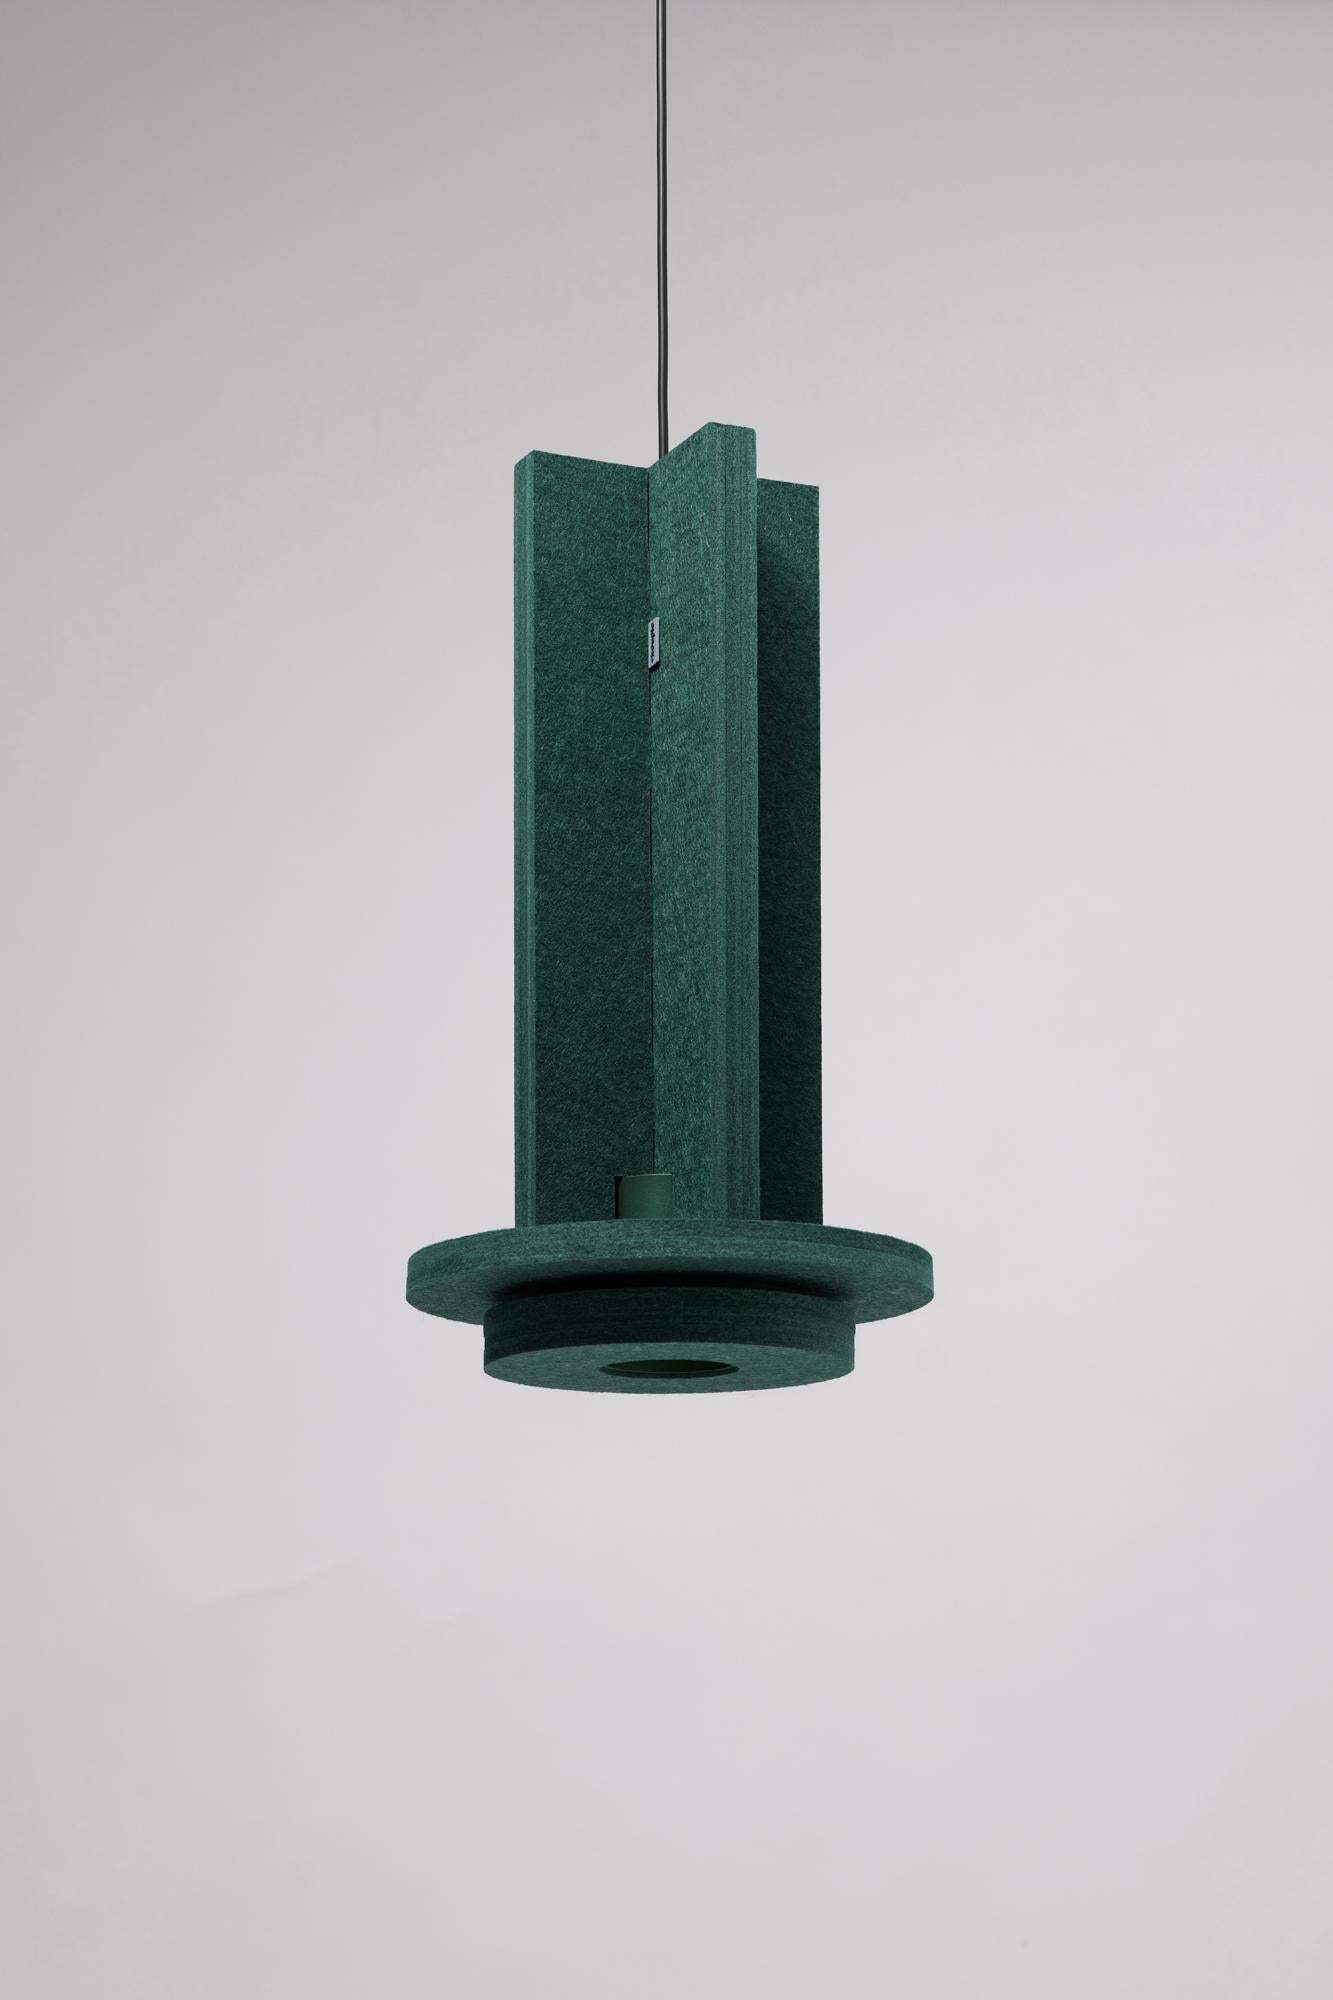 Jeffrey Green Pendant Lamp by +kouple
Dimensions: D 27 x H 48 cm.
Materials: Recycled polyester (PET felt) and powder-coated steel.

Available in different colors. Please contact us. 

All our lamps can be wired according to each country. If sold to